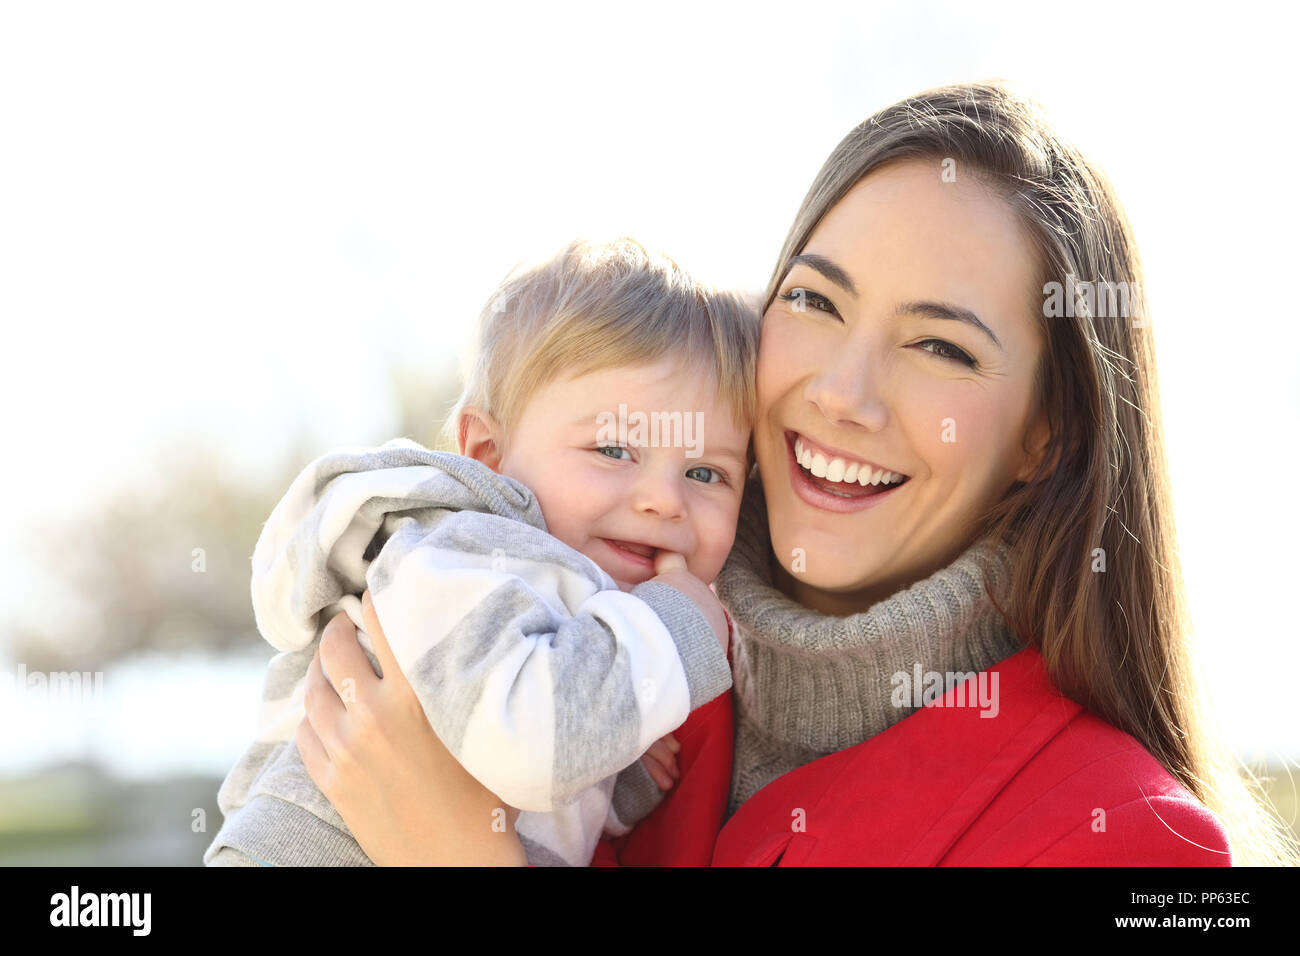 Front view portrait of a happy mother holding her son baby looking at you outdoors in winter Stock Photo